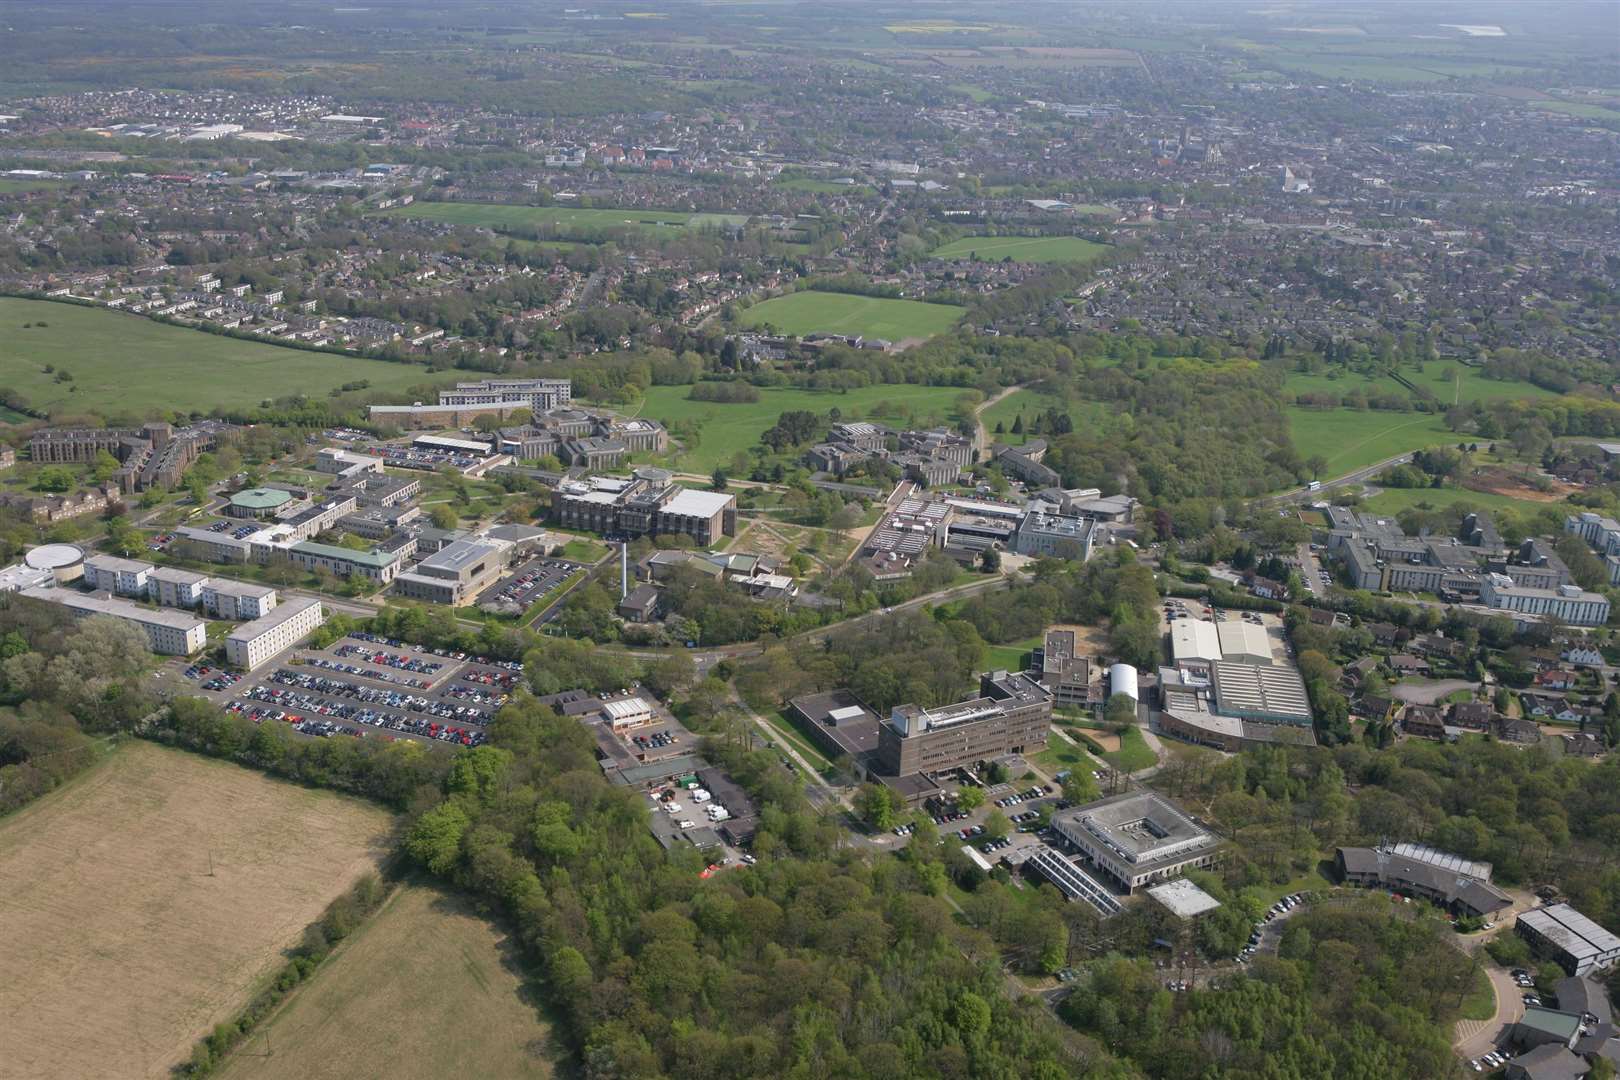 Parts of the University of Kent's Canterbury campus (pictured) have been put forward in the city council's call for sites. Picture: Martin Apps